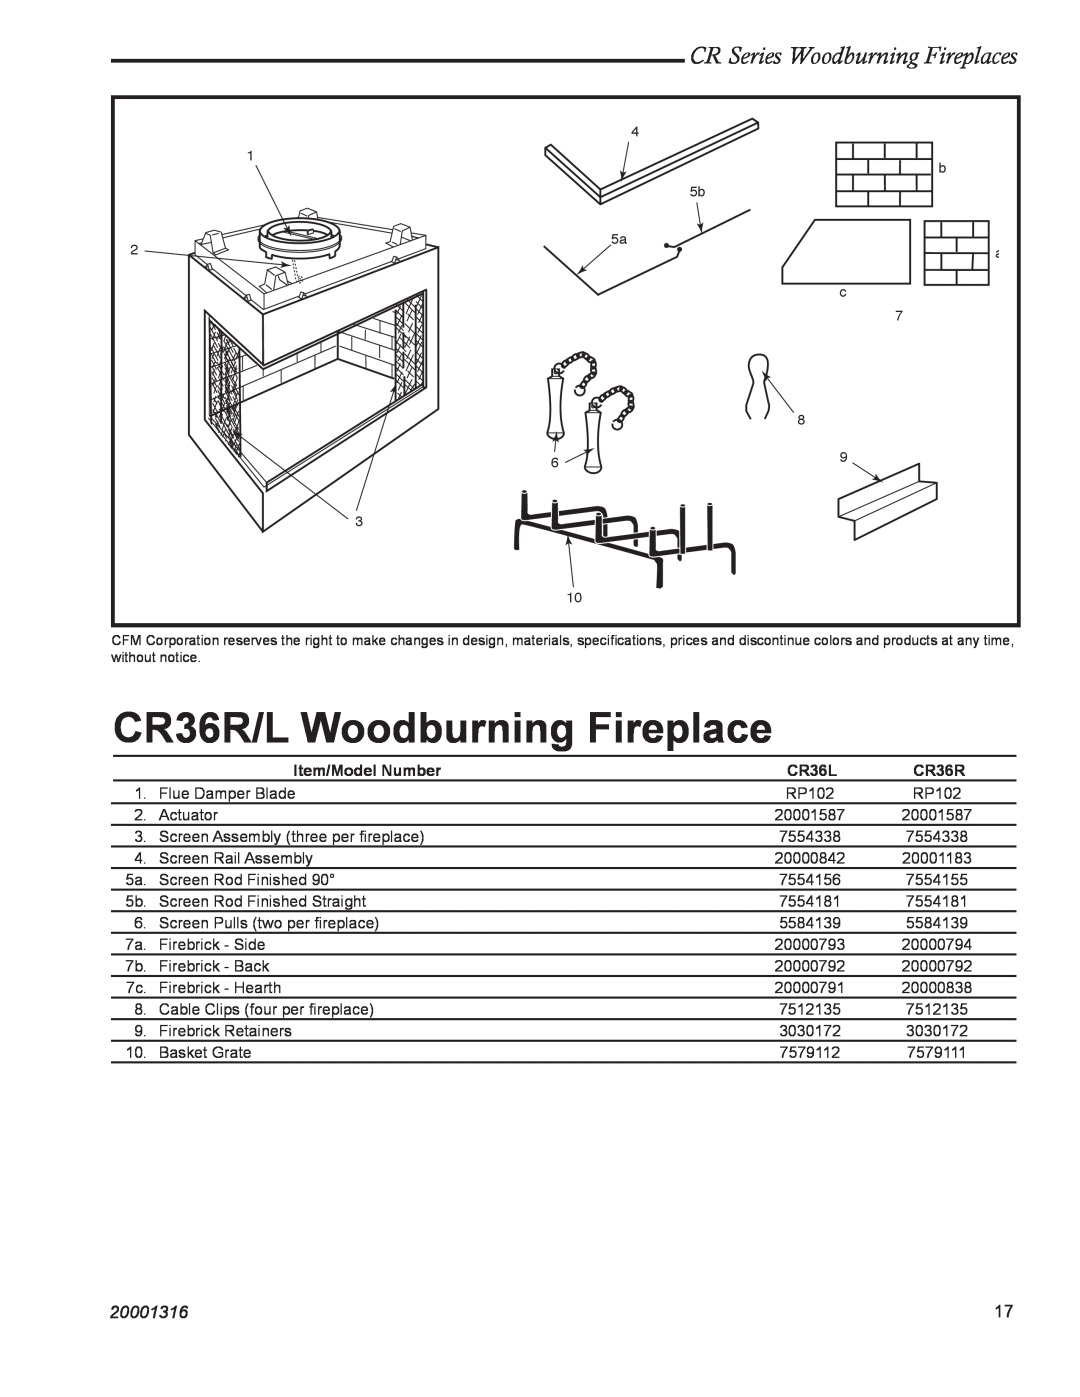 Vermont Casting CR36L manual CR36R/L Woodburning Fireplace, CR Series Woodburning Fireplaces, 20001316, Item/Model Number 